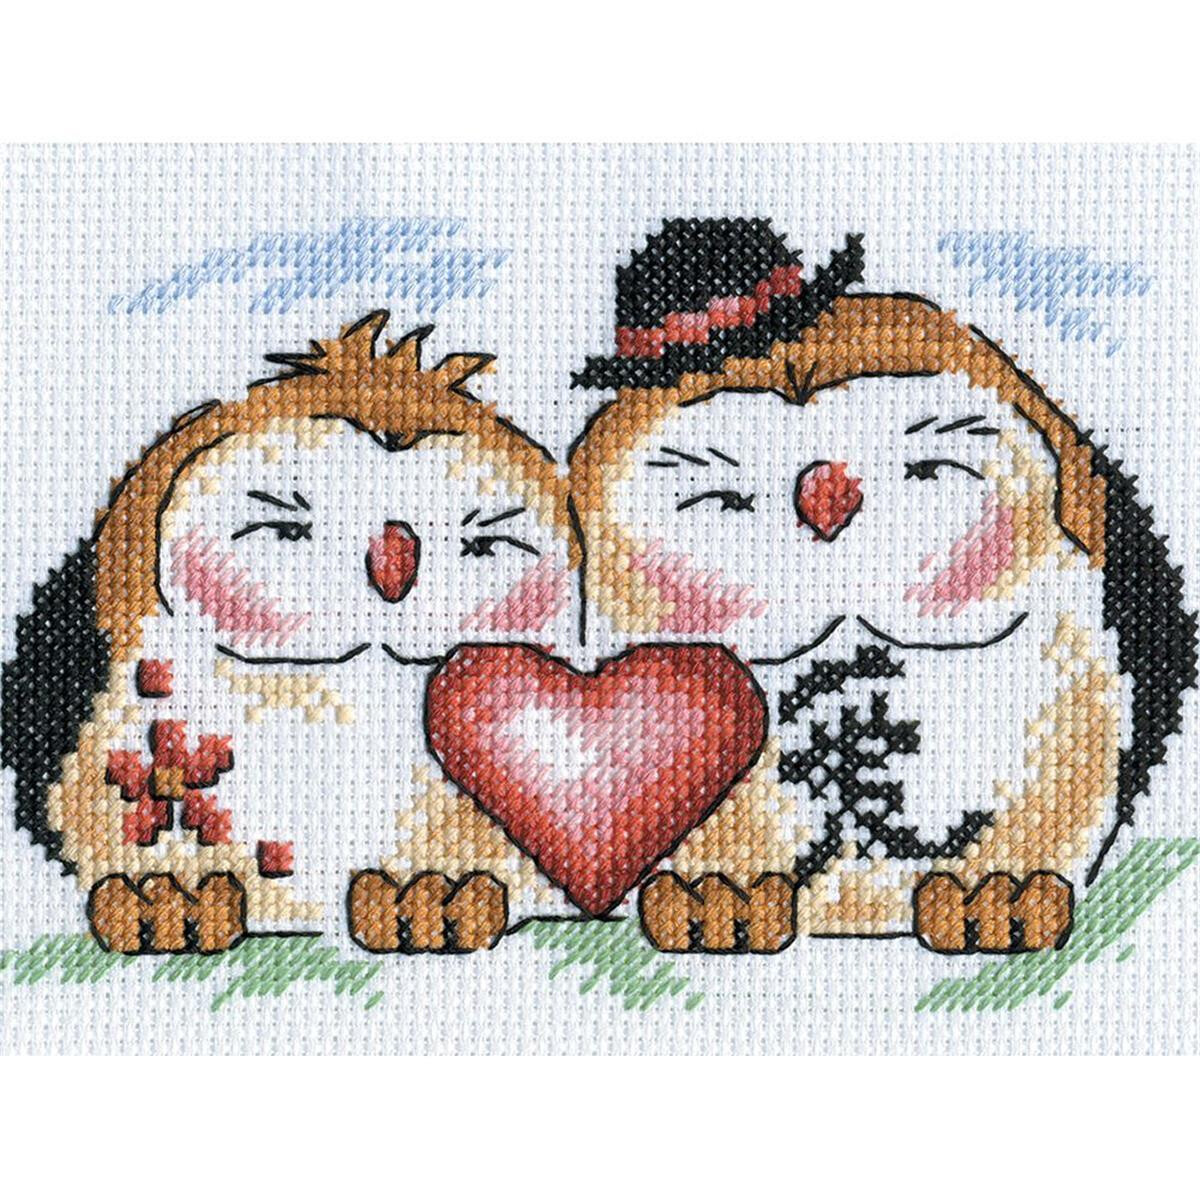 Panna counted cross stitch kit "Love in the...